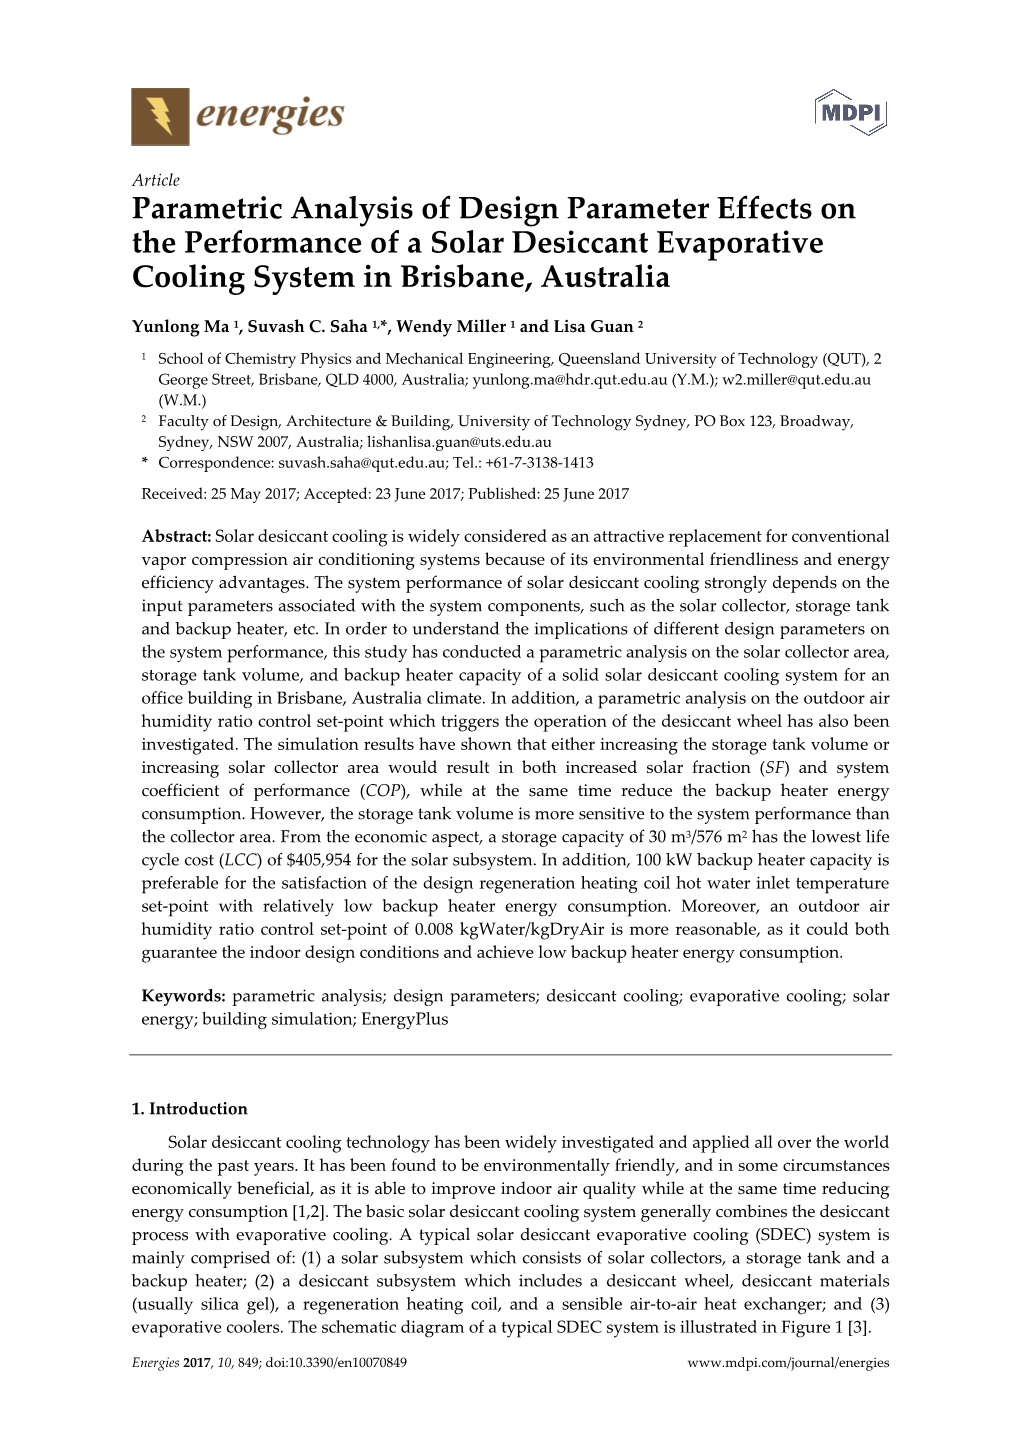 Parametric Analysis of Design Parameter Effects on the Performance of a Solar Desiccant Evaporative Cooling System in Brisbane, Australia